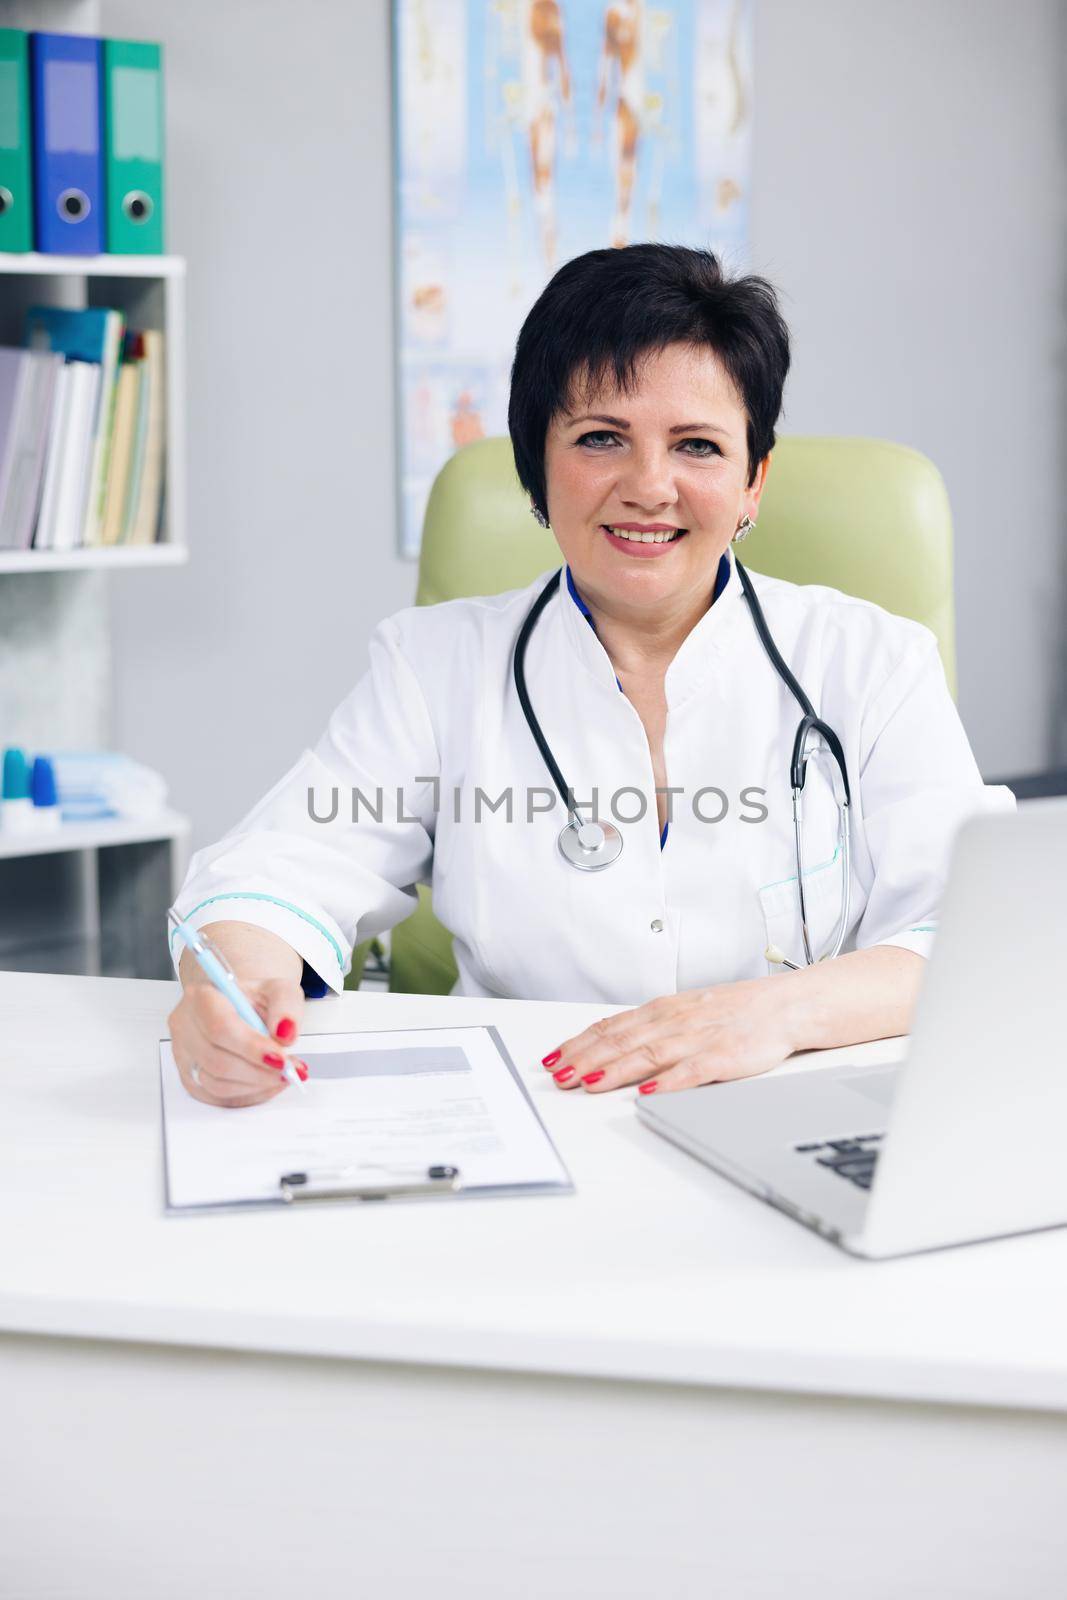 Confident woman wear white medical coat with stethoscope looking at camera. Happy lady professional medic clinic staff female nurse or doctor posing for close up portrait by uflypro